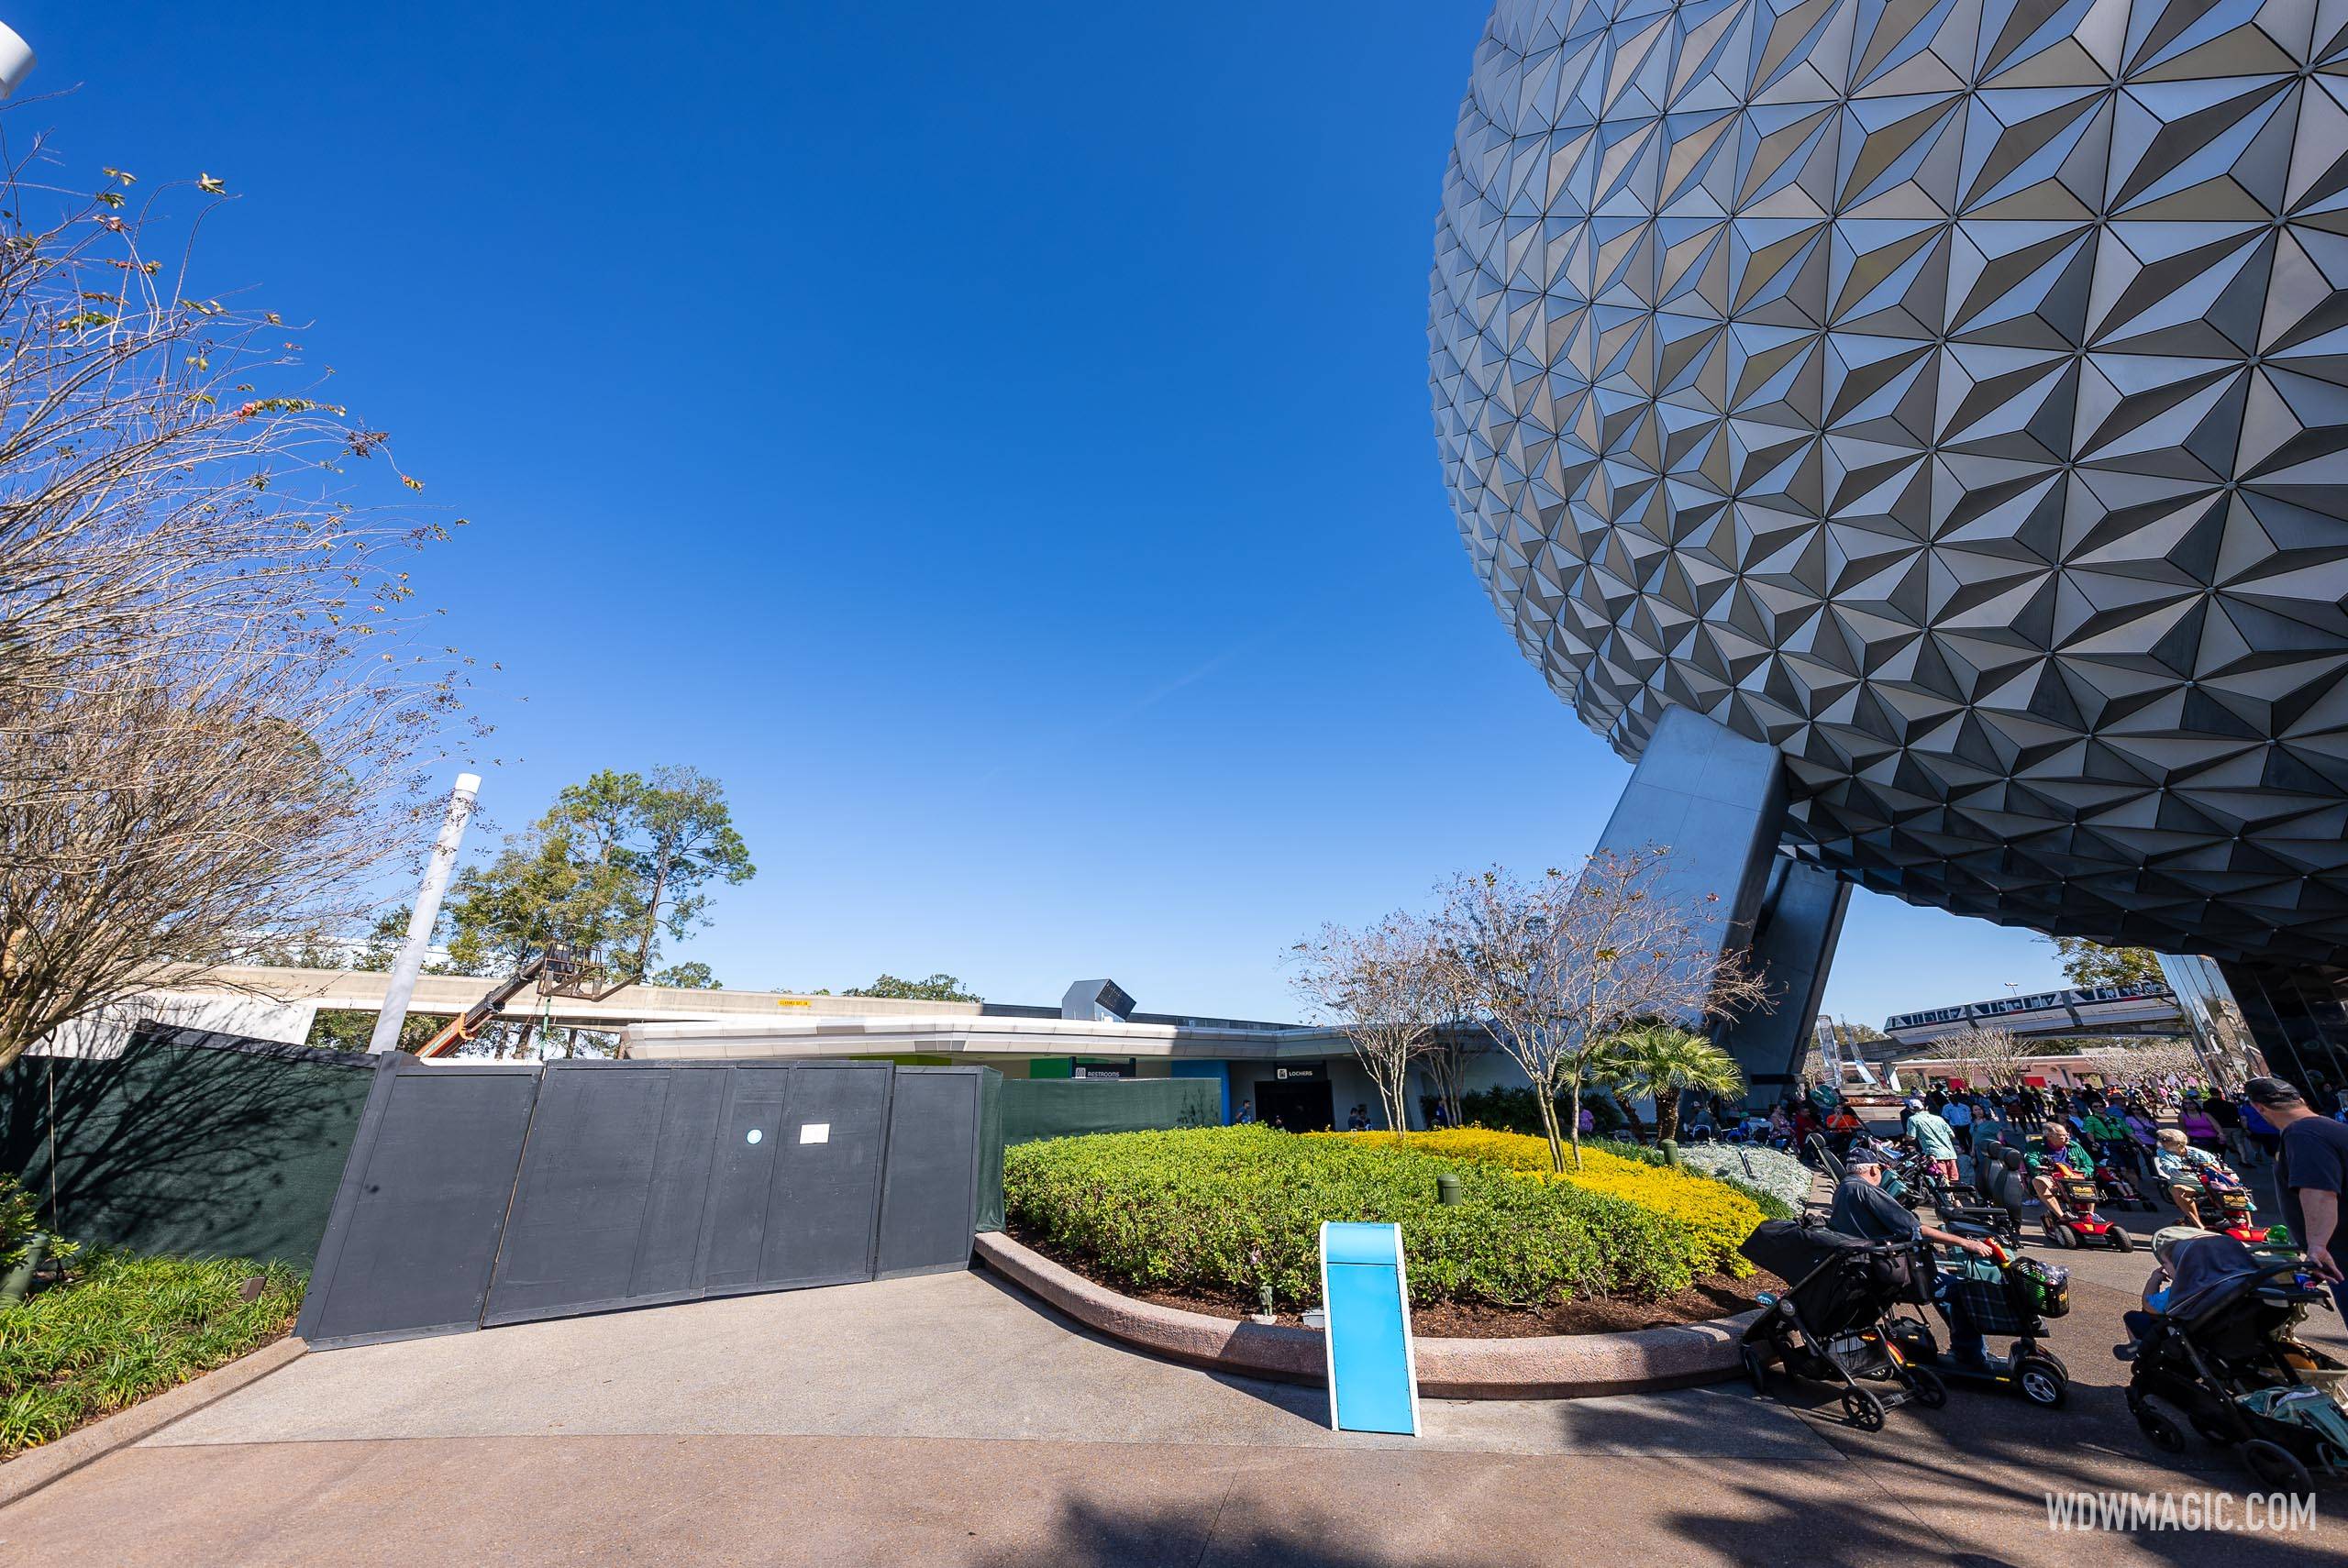 New backstage gate at former EPCOT Future World bypass